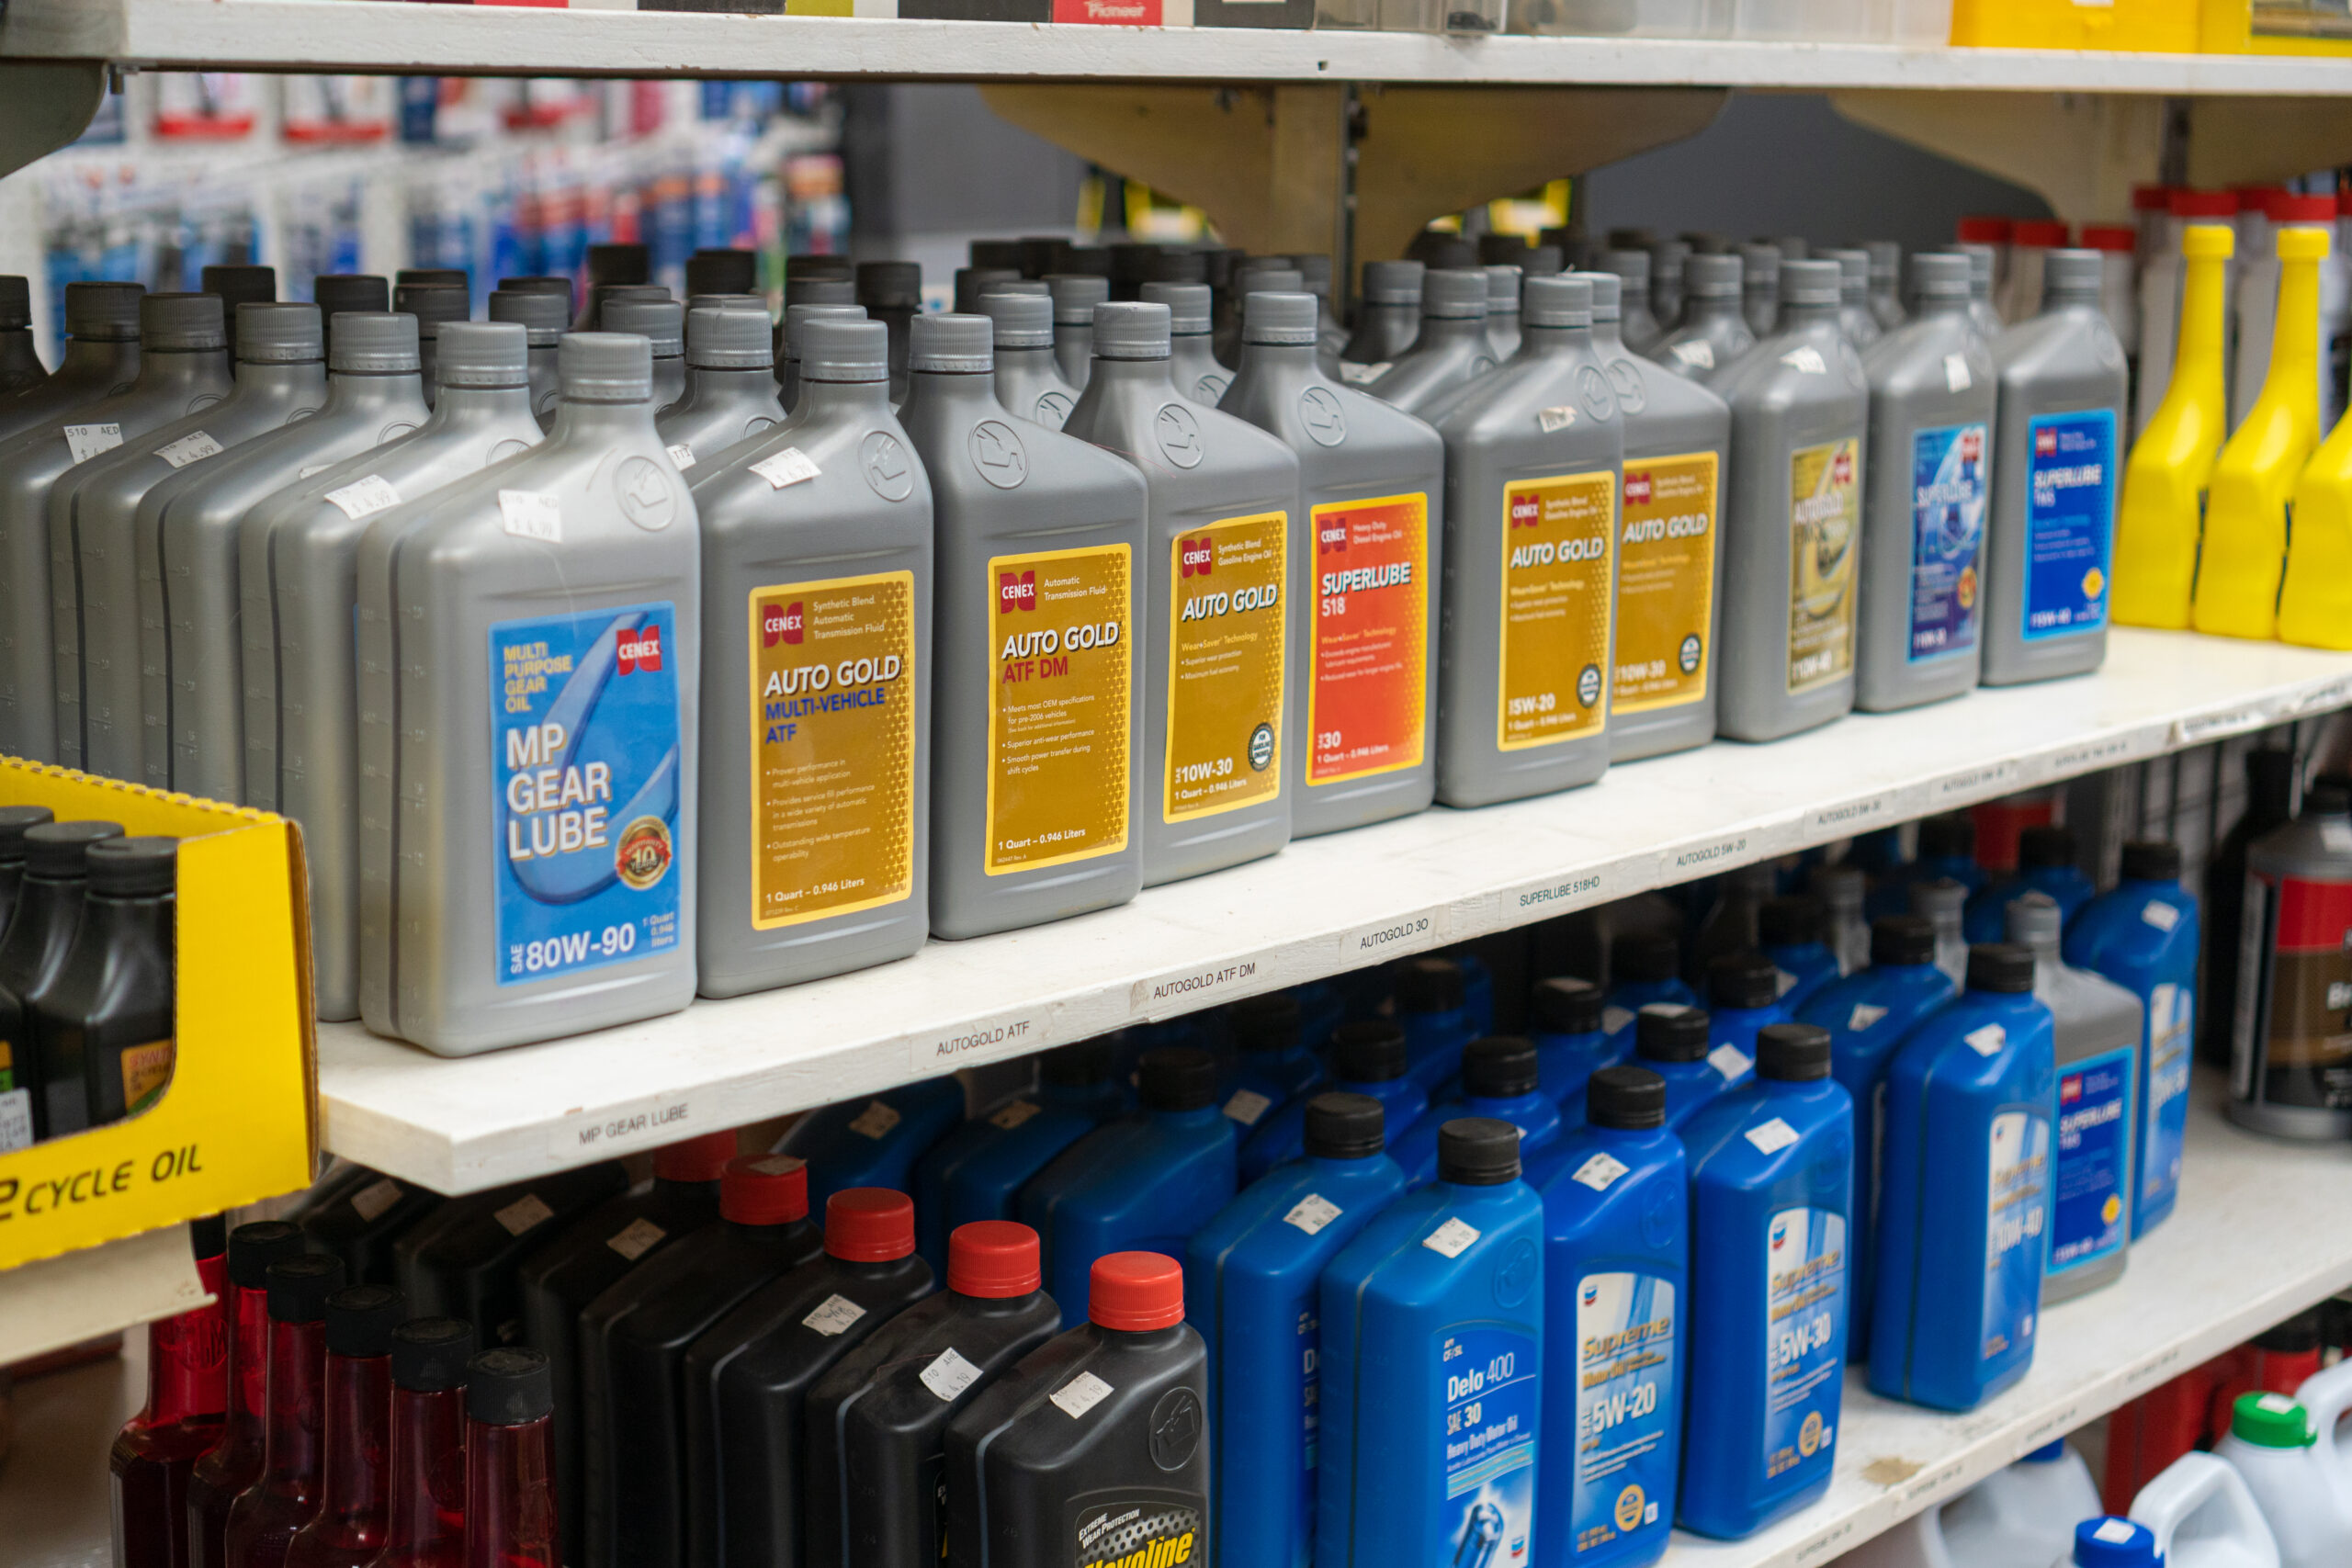 A close up of Cenex & Chevron brand products like Auto Gold & 5W-20 sold by Four Star Supply